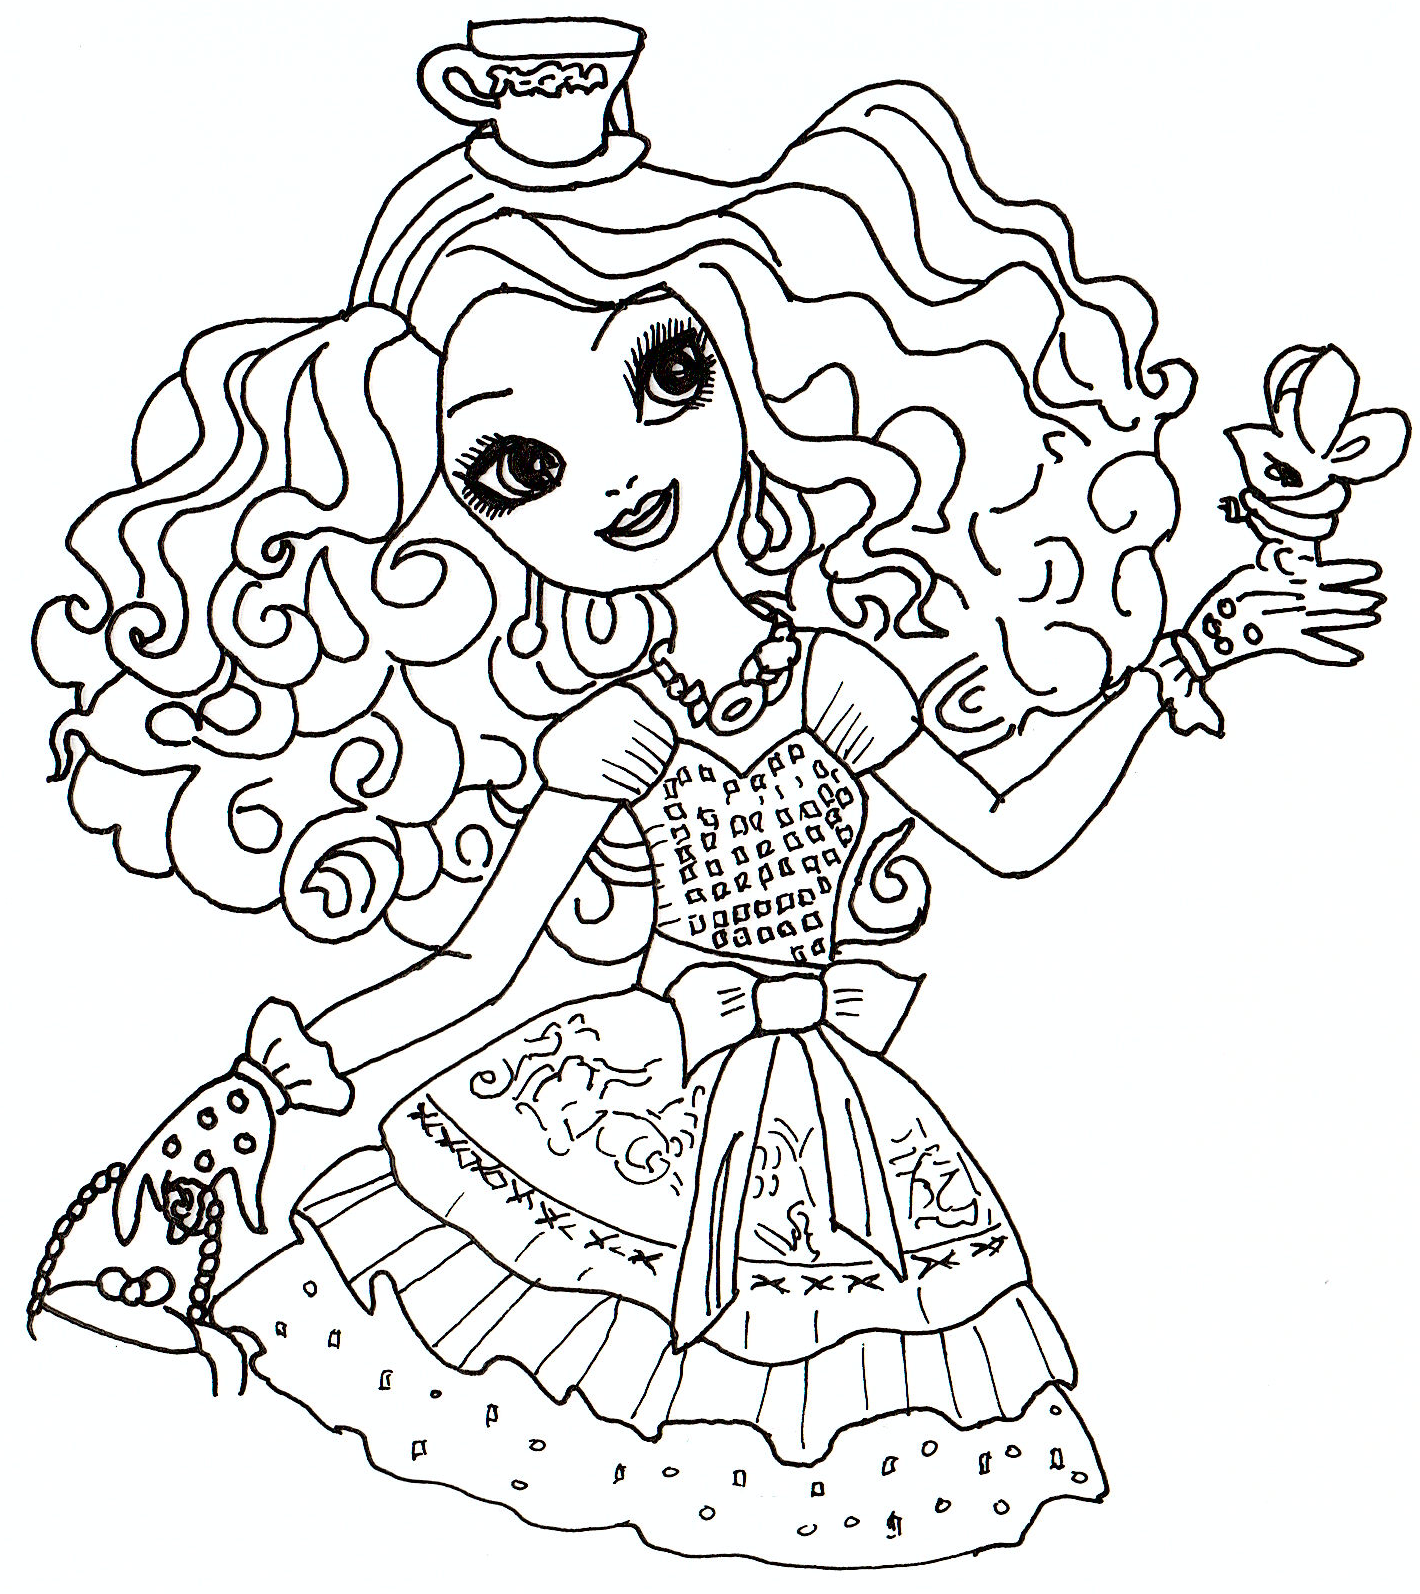 Free printable ever after high coloring pages madeline hatter ever after high coloring sheet